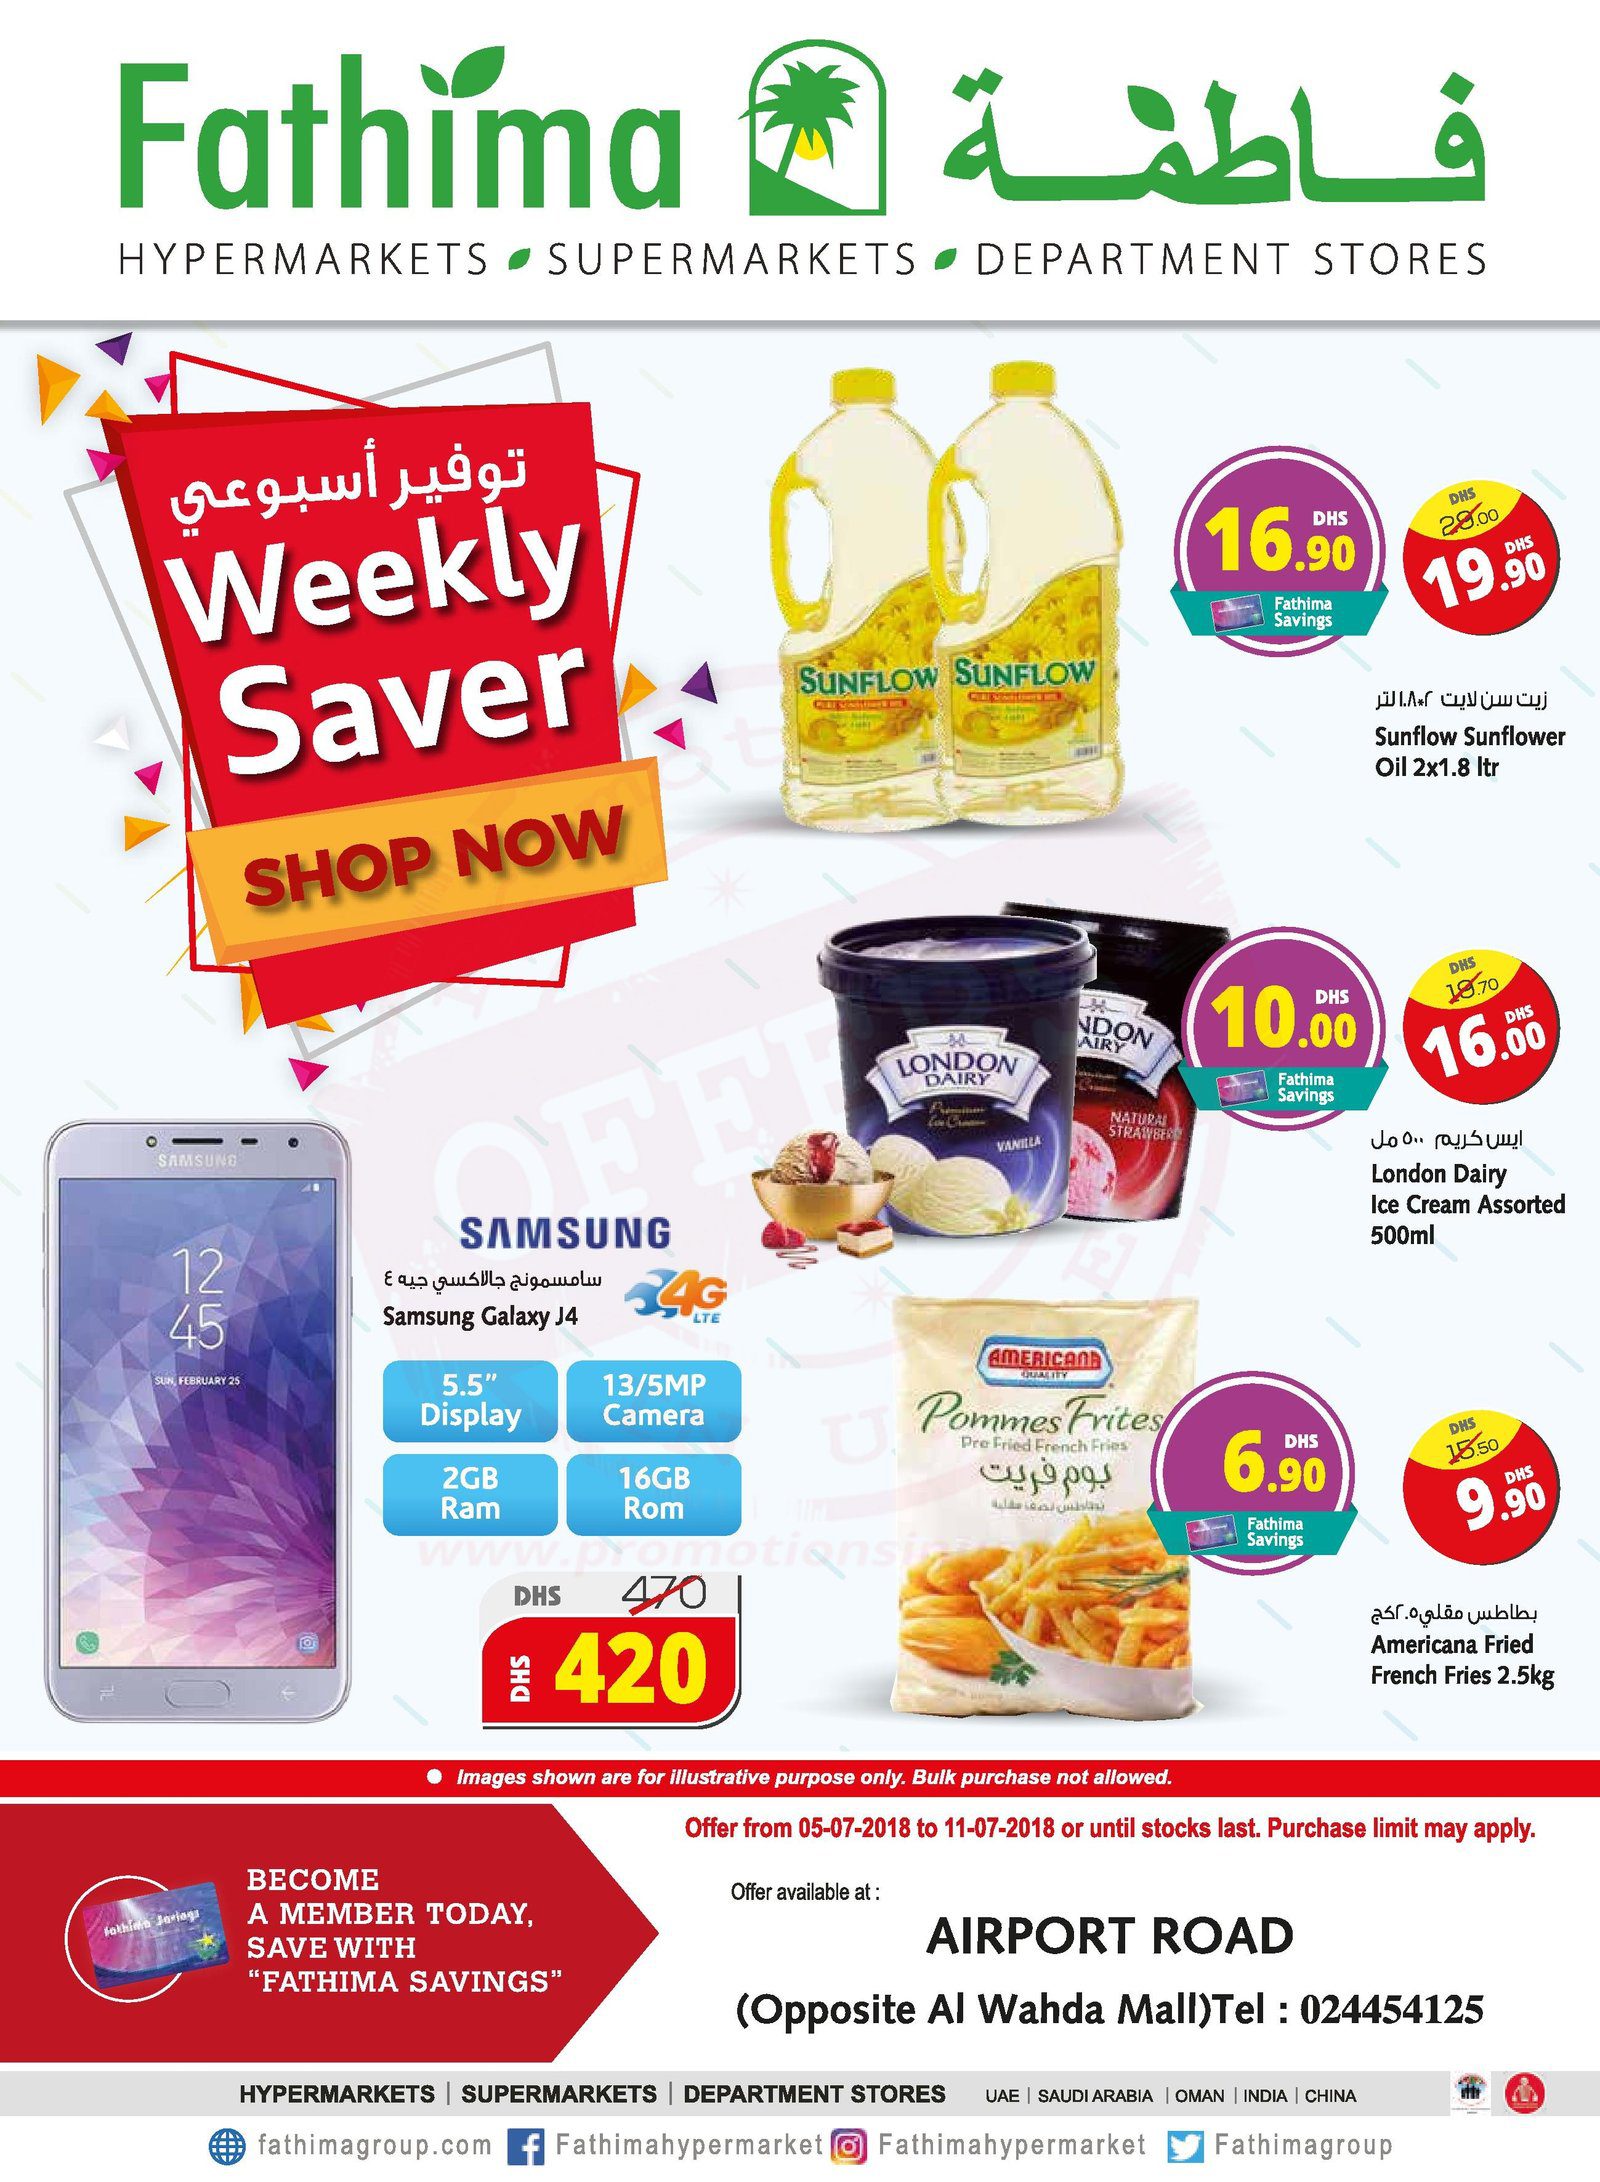 Fathima Weekly Saver Offer